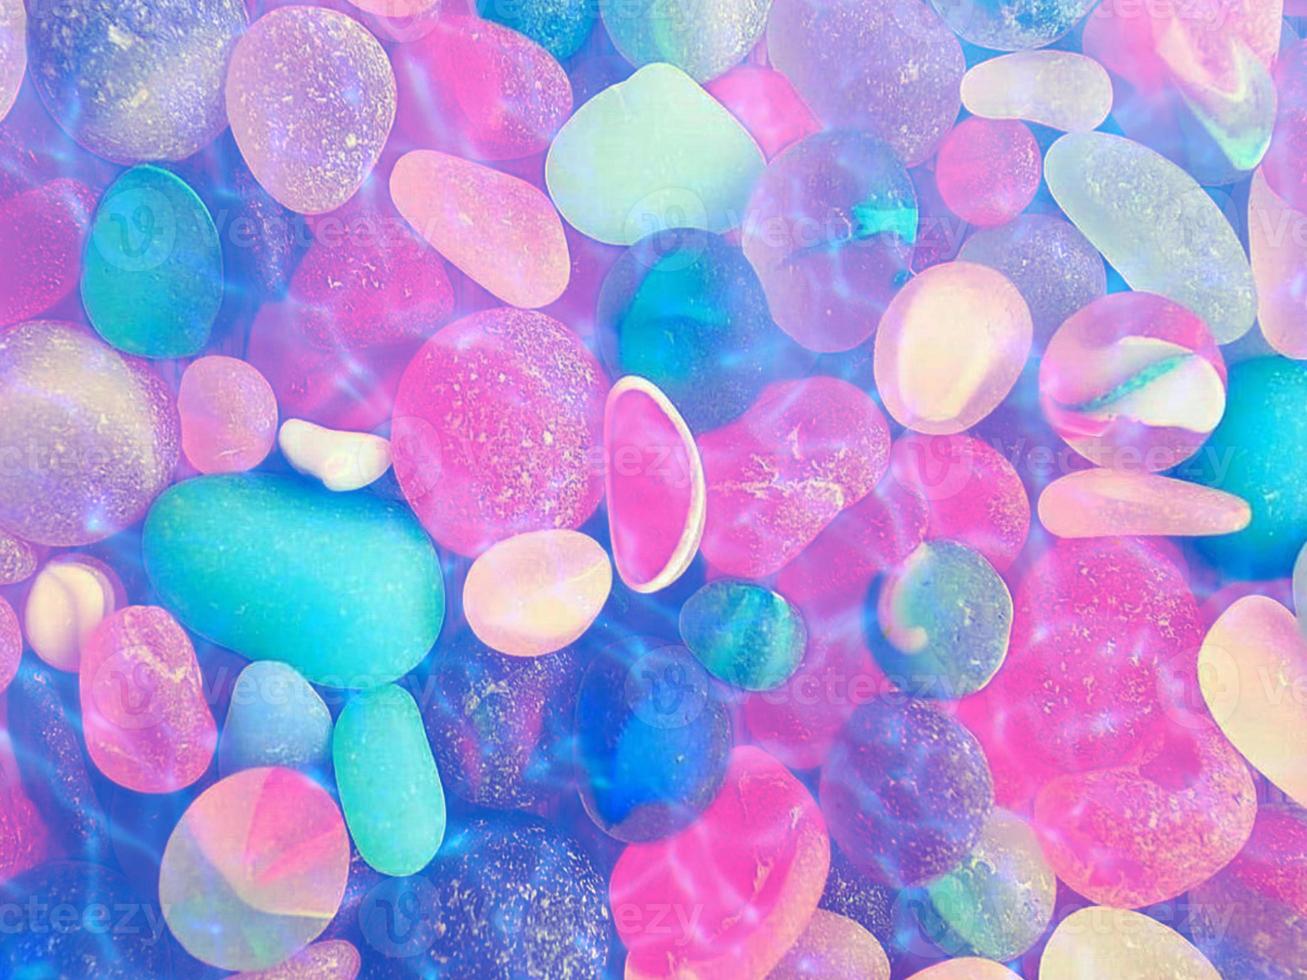 A pile of small colorful stones - Bubbles